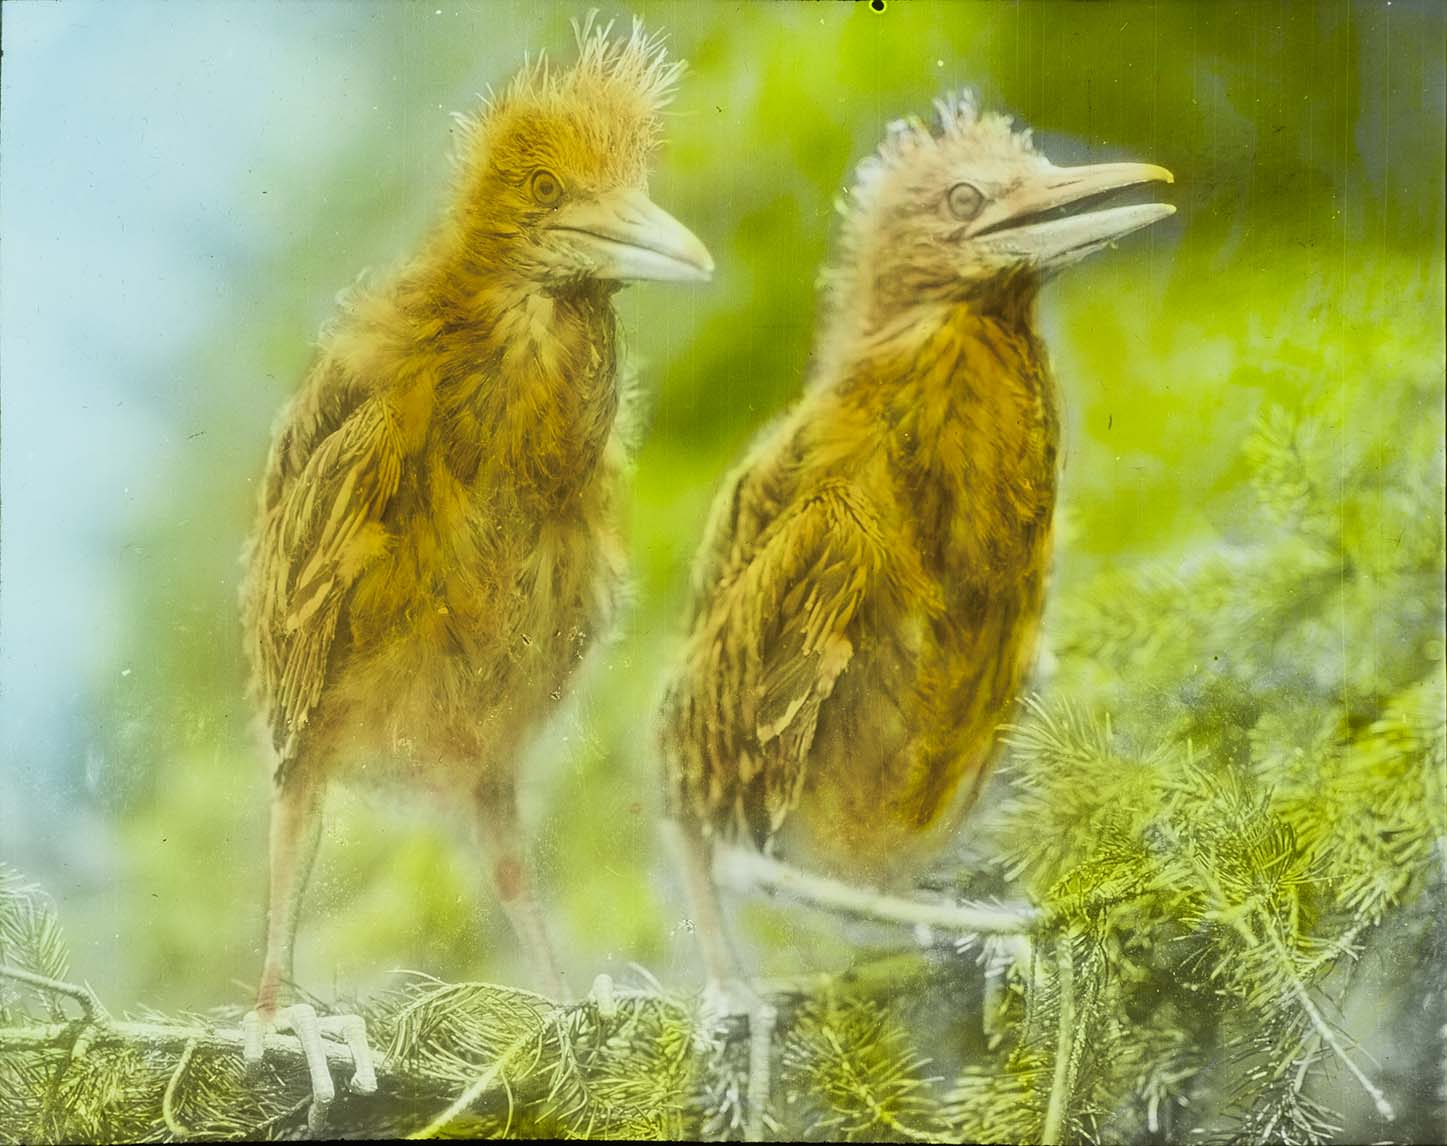 Lantern slide and photograph of two young Black-crowned Night Herons